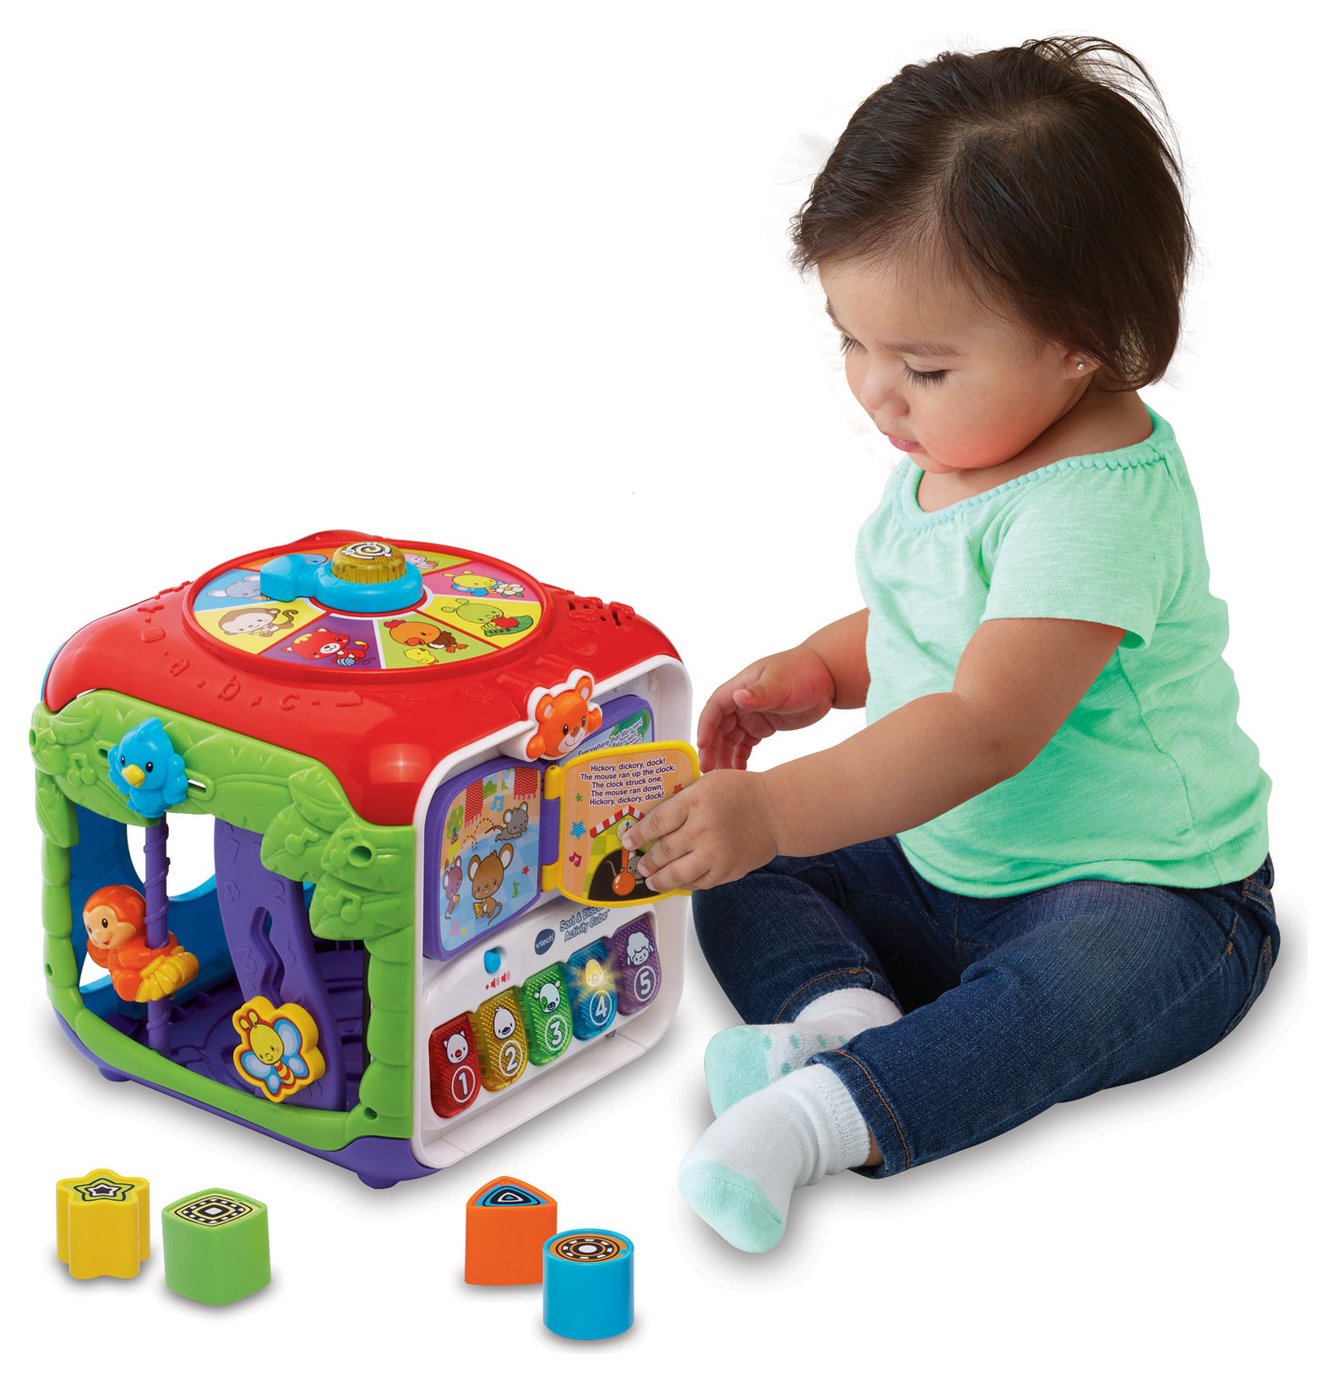 VTech Sort & Discover Activity Cube Review